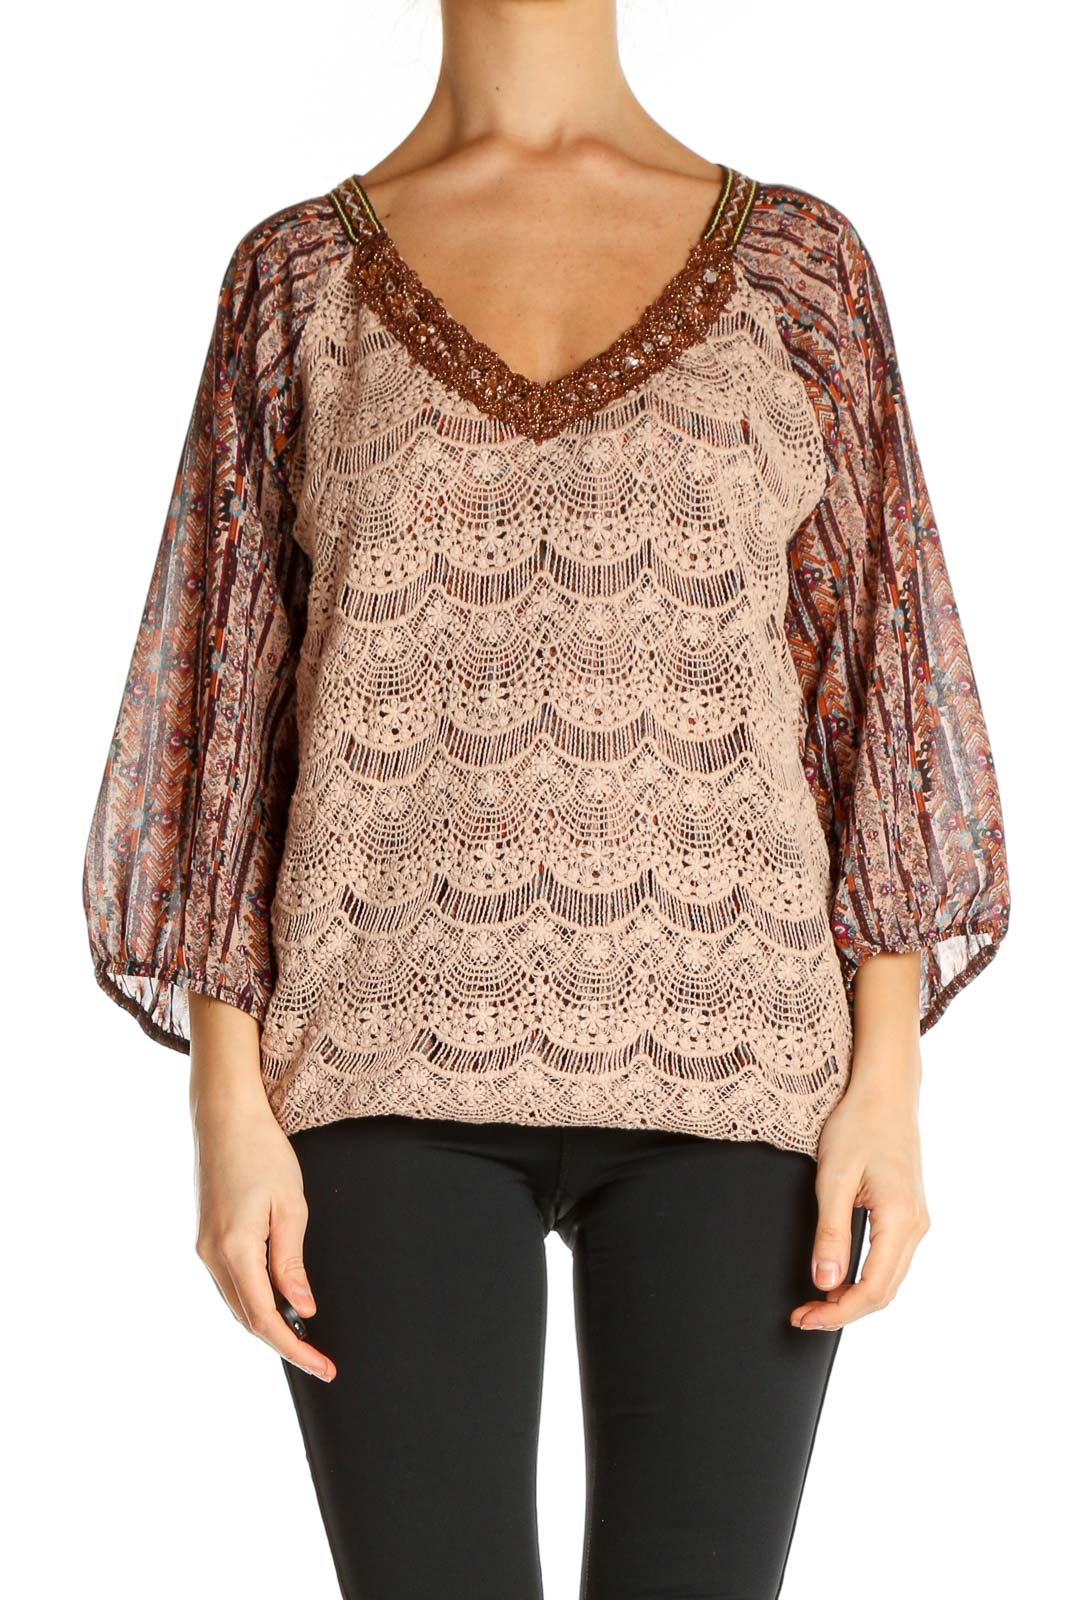 Beige Textured Blouse Front